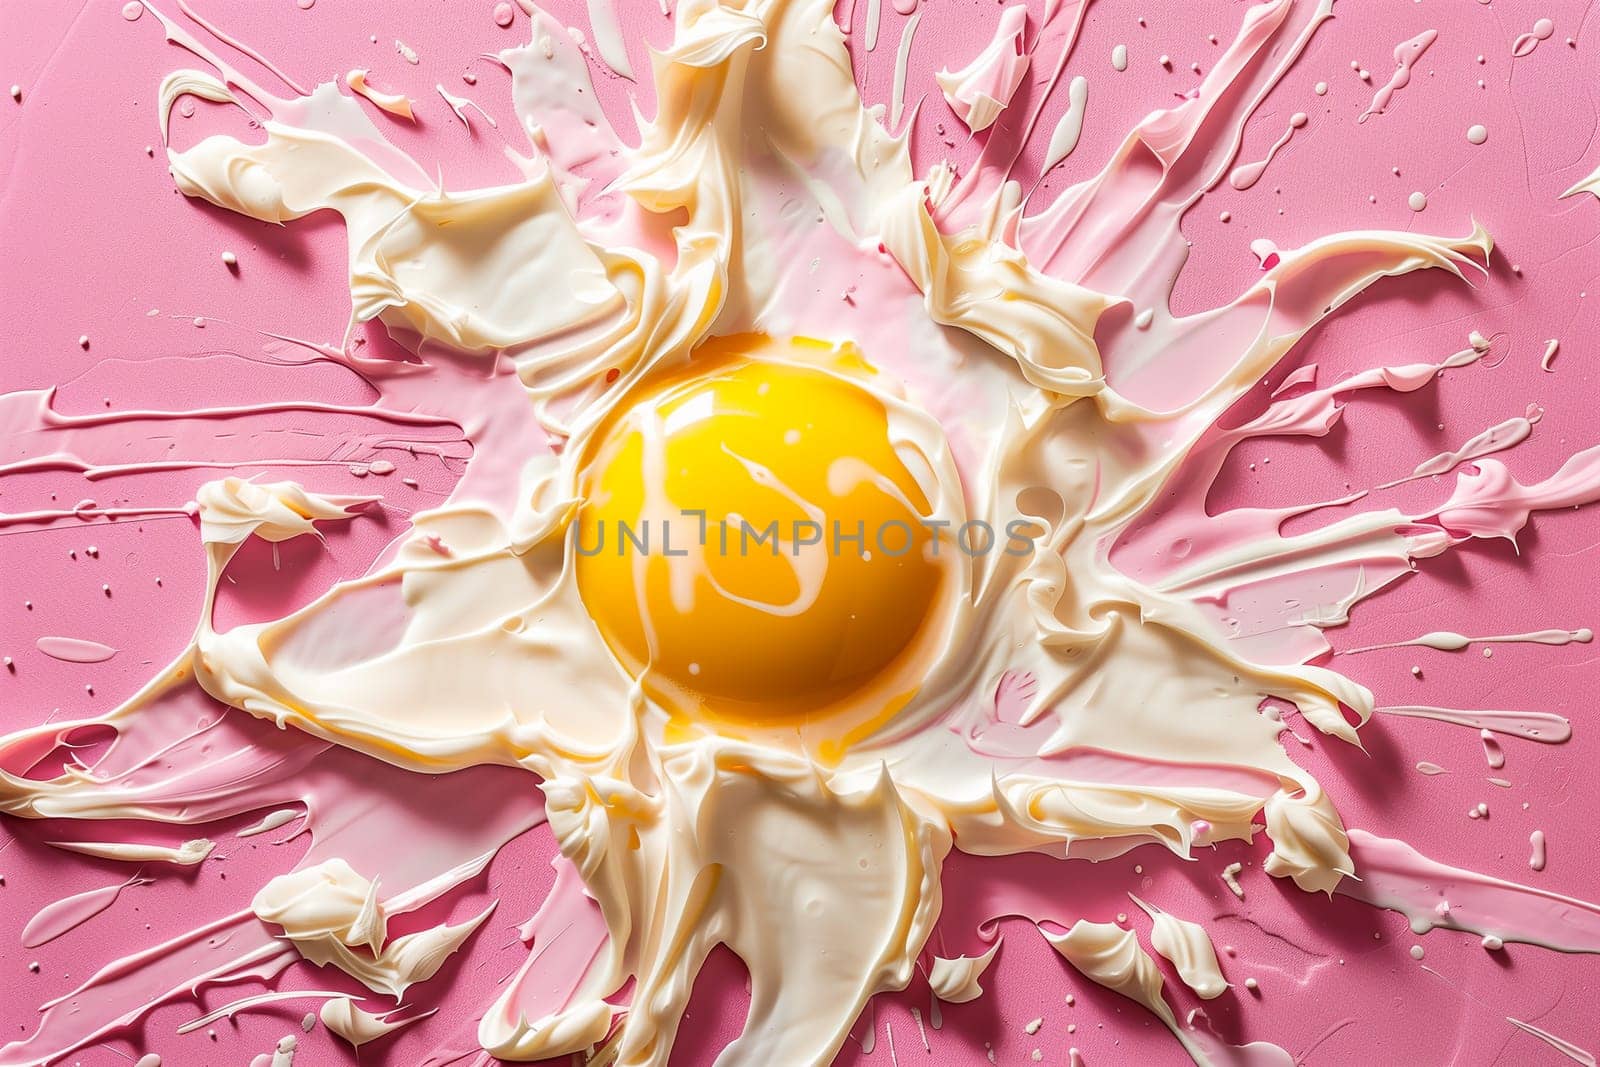 A single egg yolk sits in a white egg white that has spilled out on a pink surface.